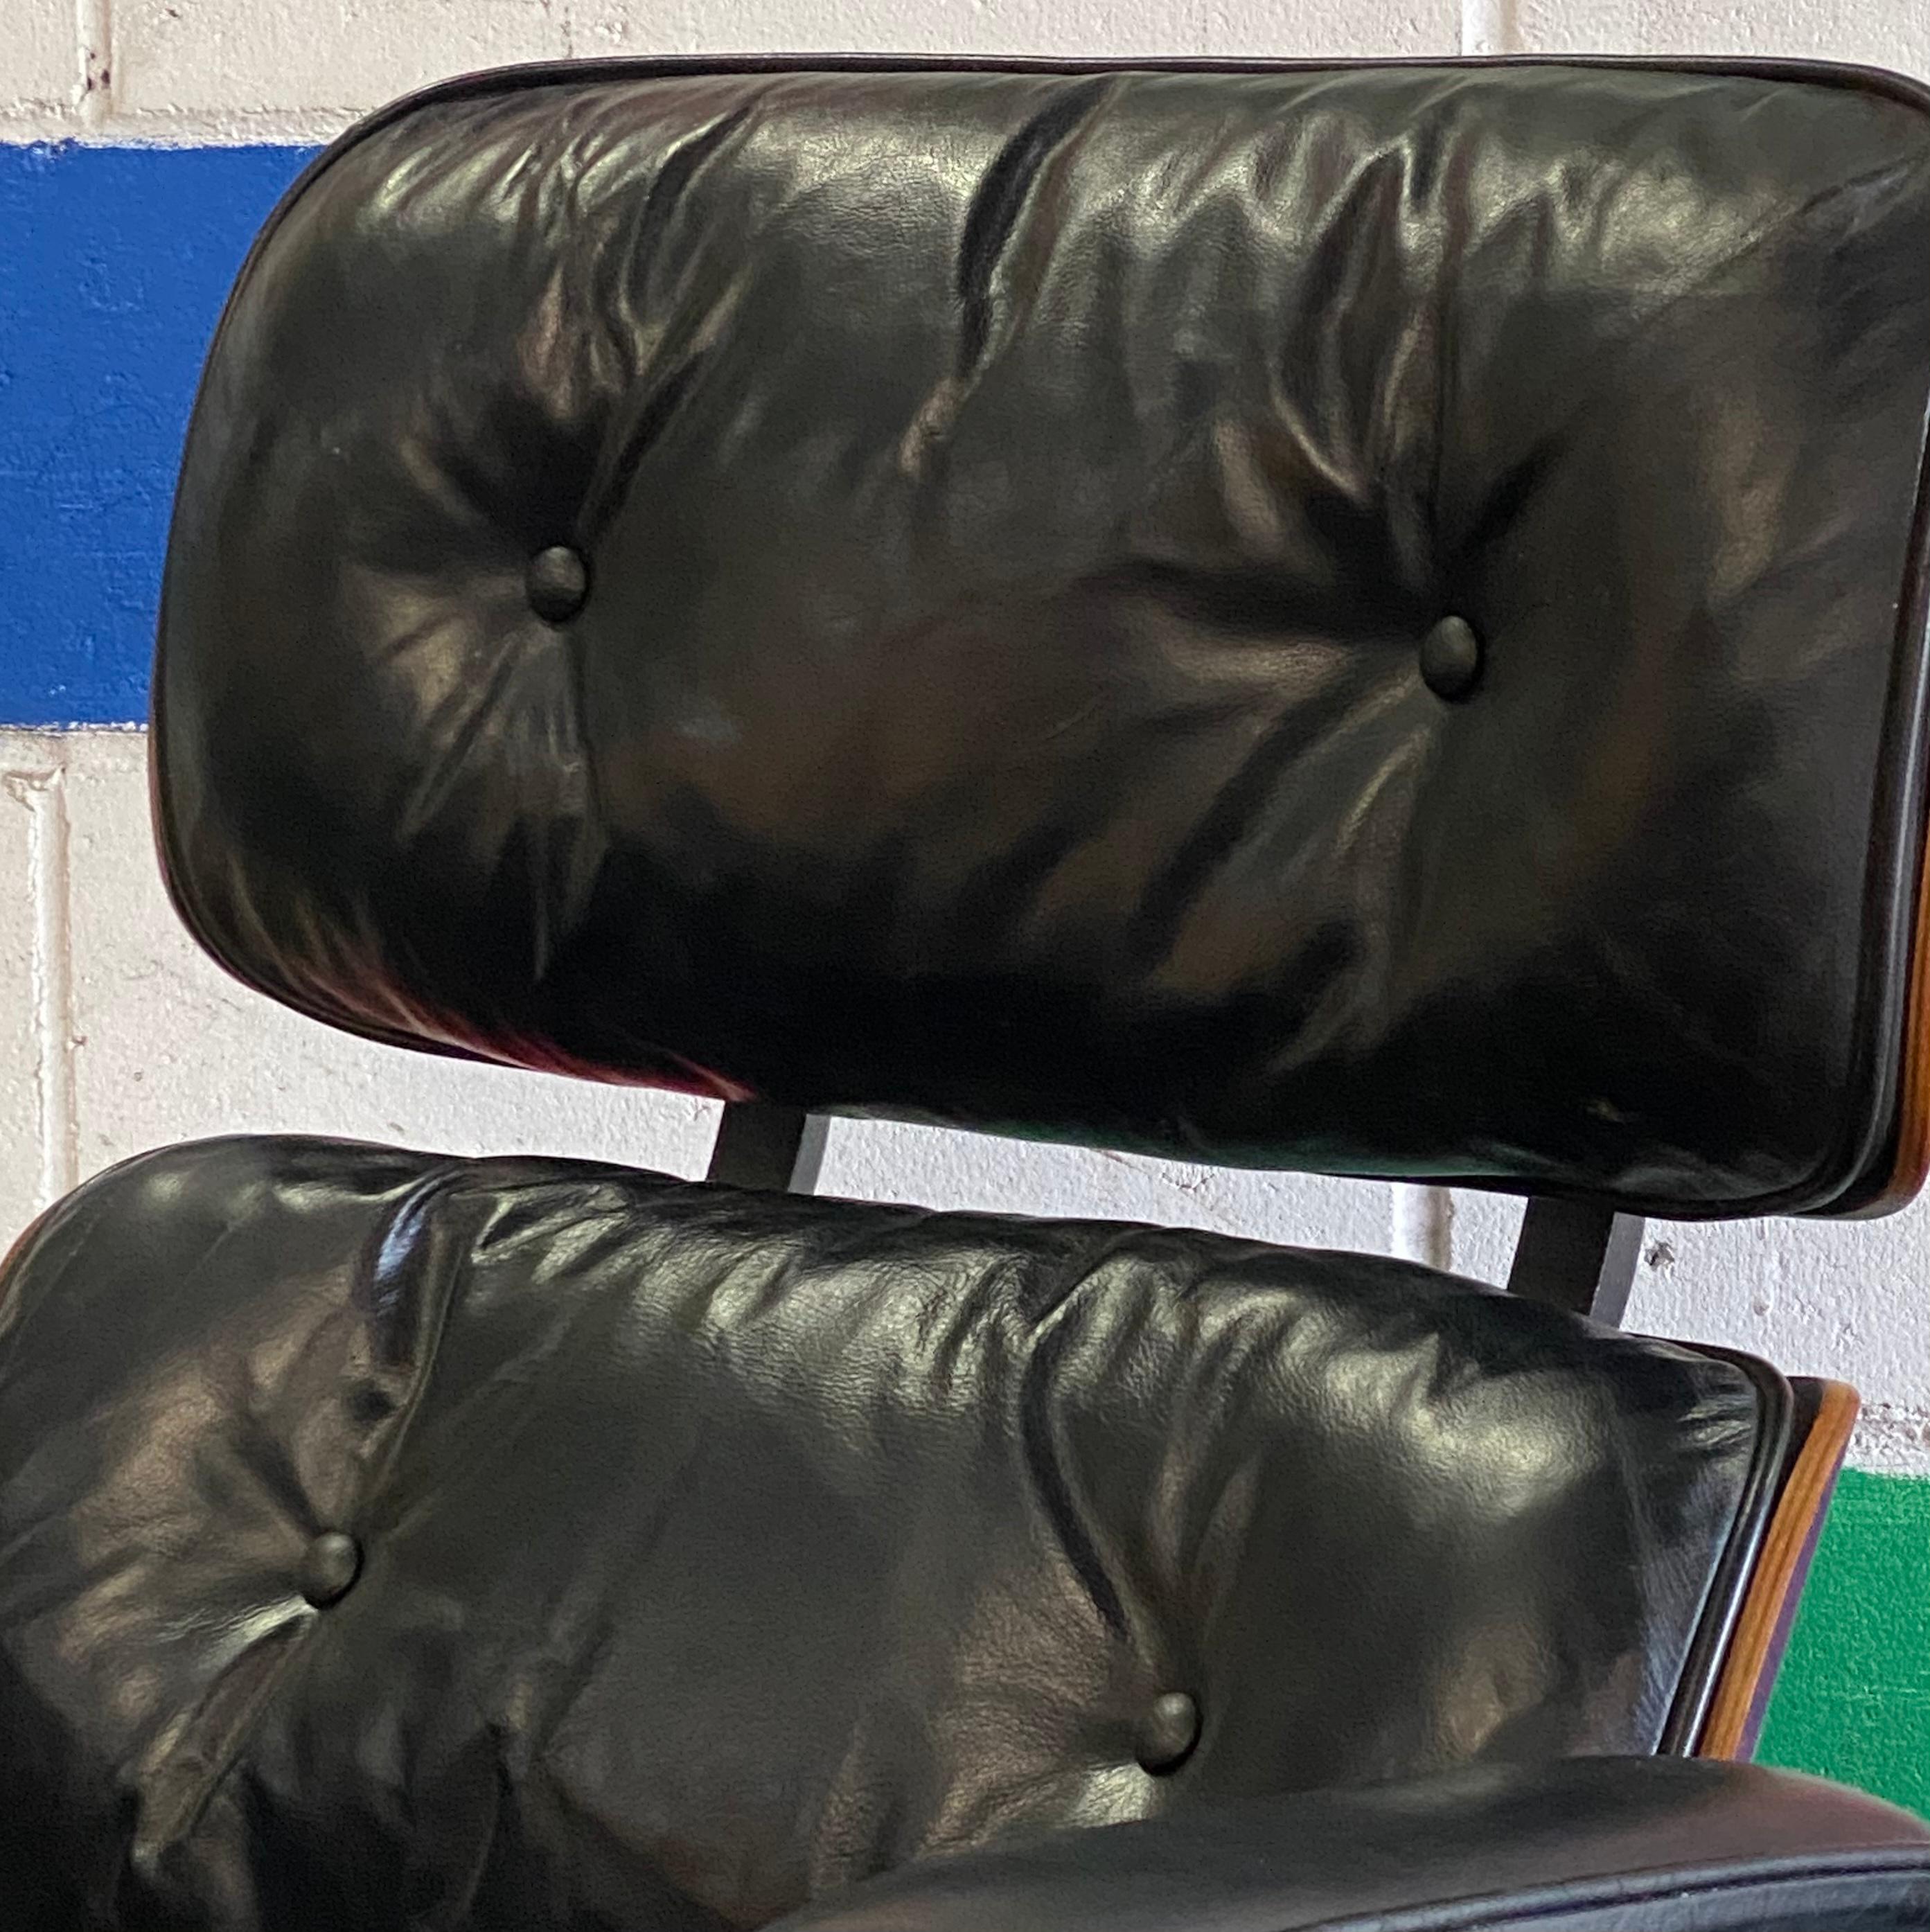 Beautiful Eames chair and ottoman by Herman Miller from the 1960s. Beautiful rosewood exterior with replaced seat shock mounts ($600 value). Original chair and ottoman pair. Black leather in good condition and all parts intact. Chair swivels and